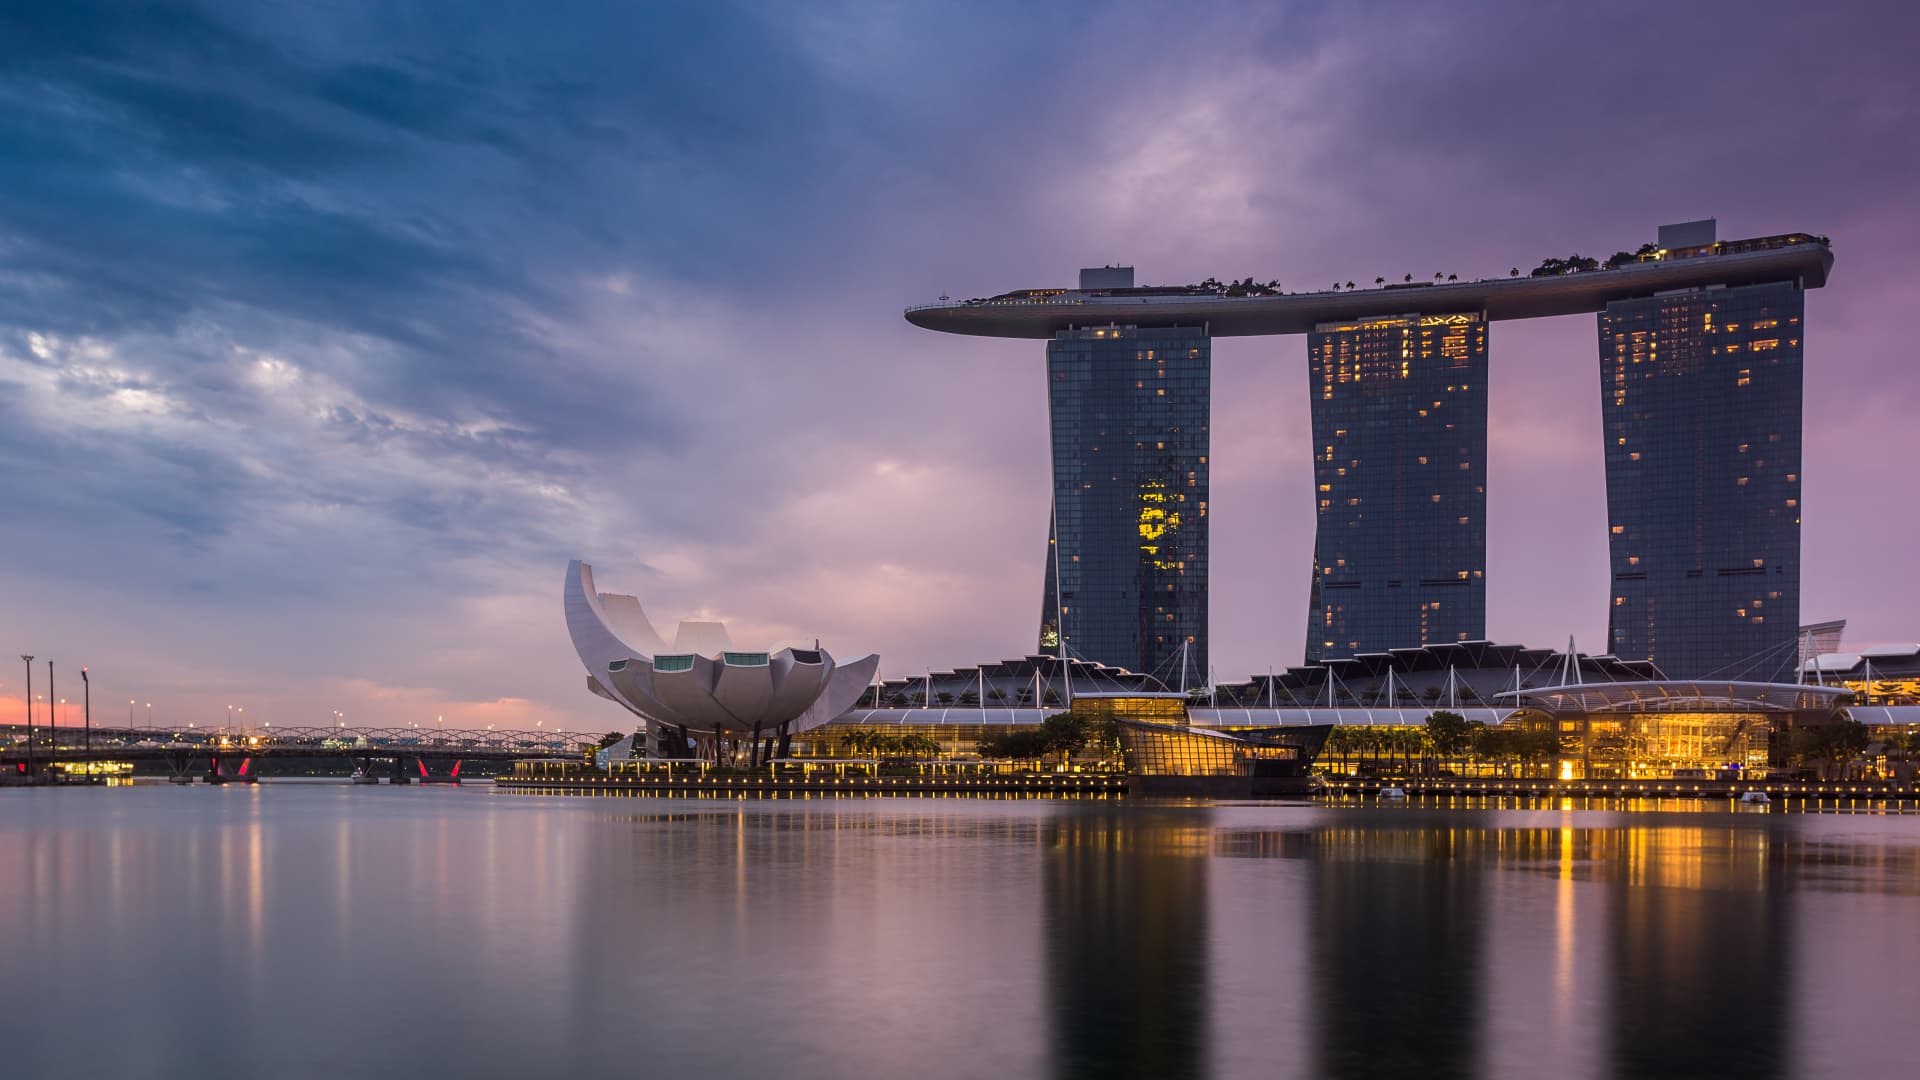 Singapore is now the world’s freest financial system, displacing Hong Kong after 53 years